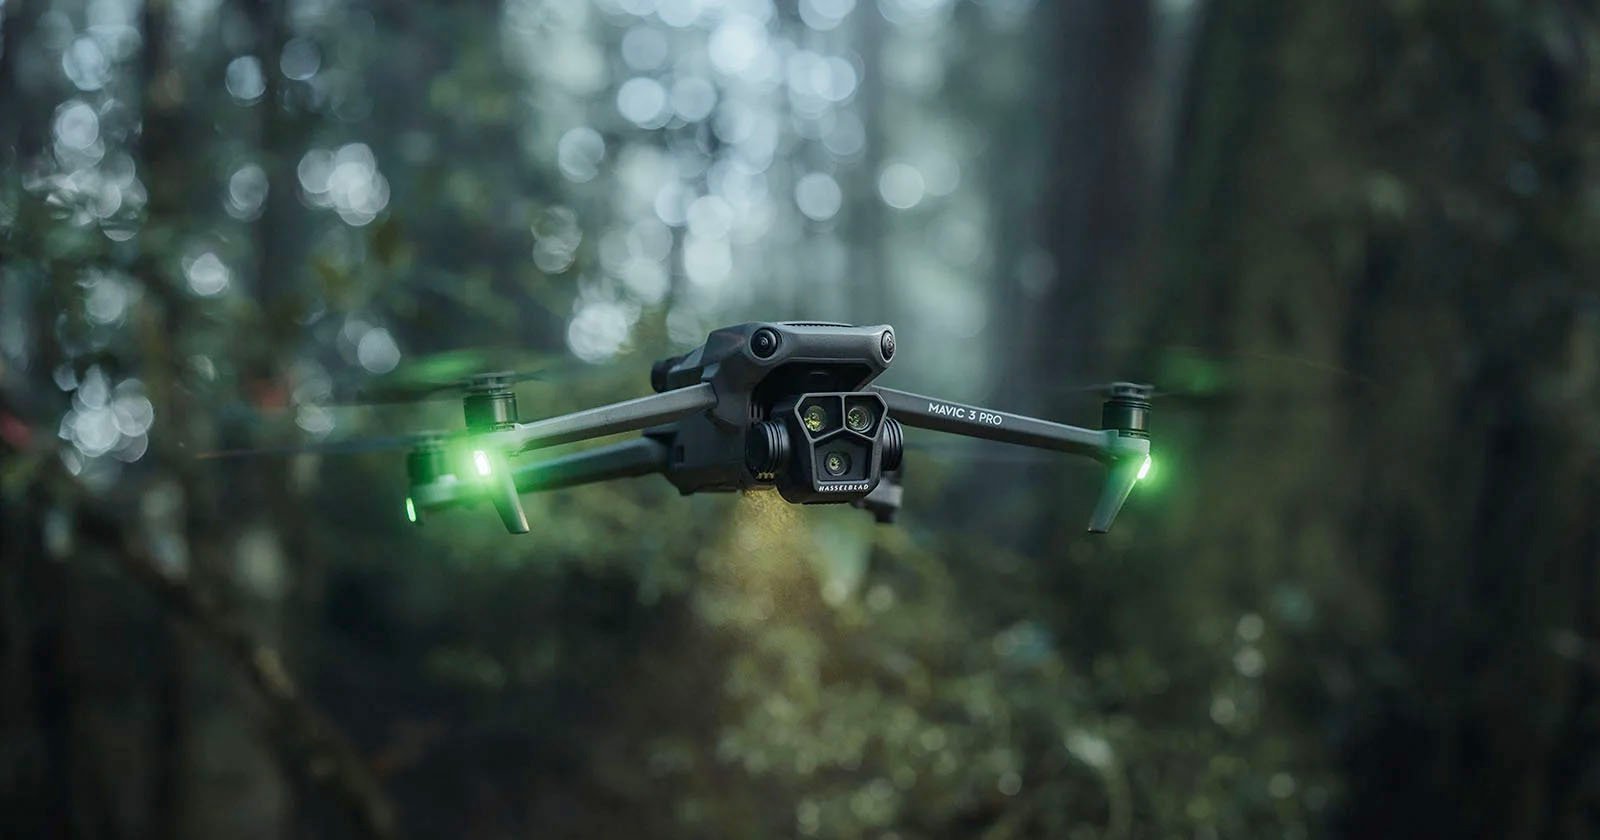 DJI Says Banning It in the U.S. Will Hurt the Entire Drone Ecosystem